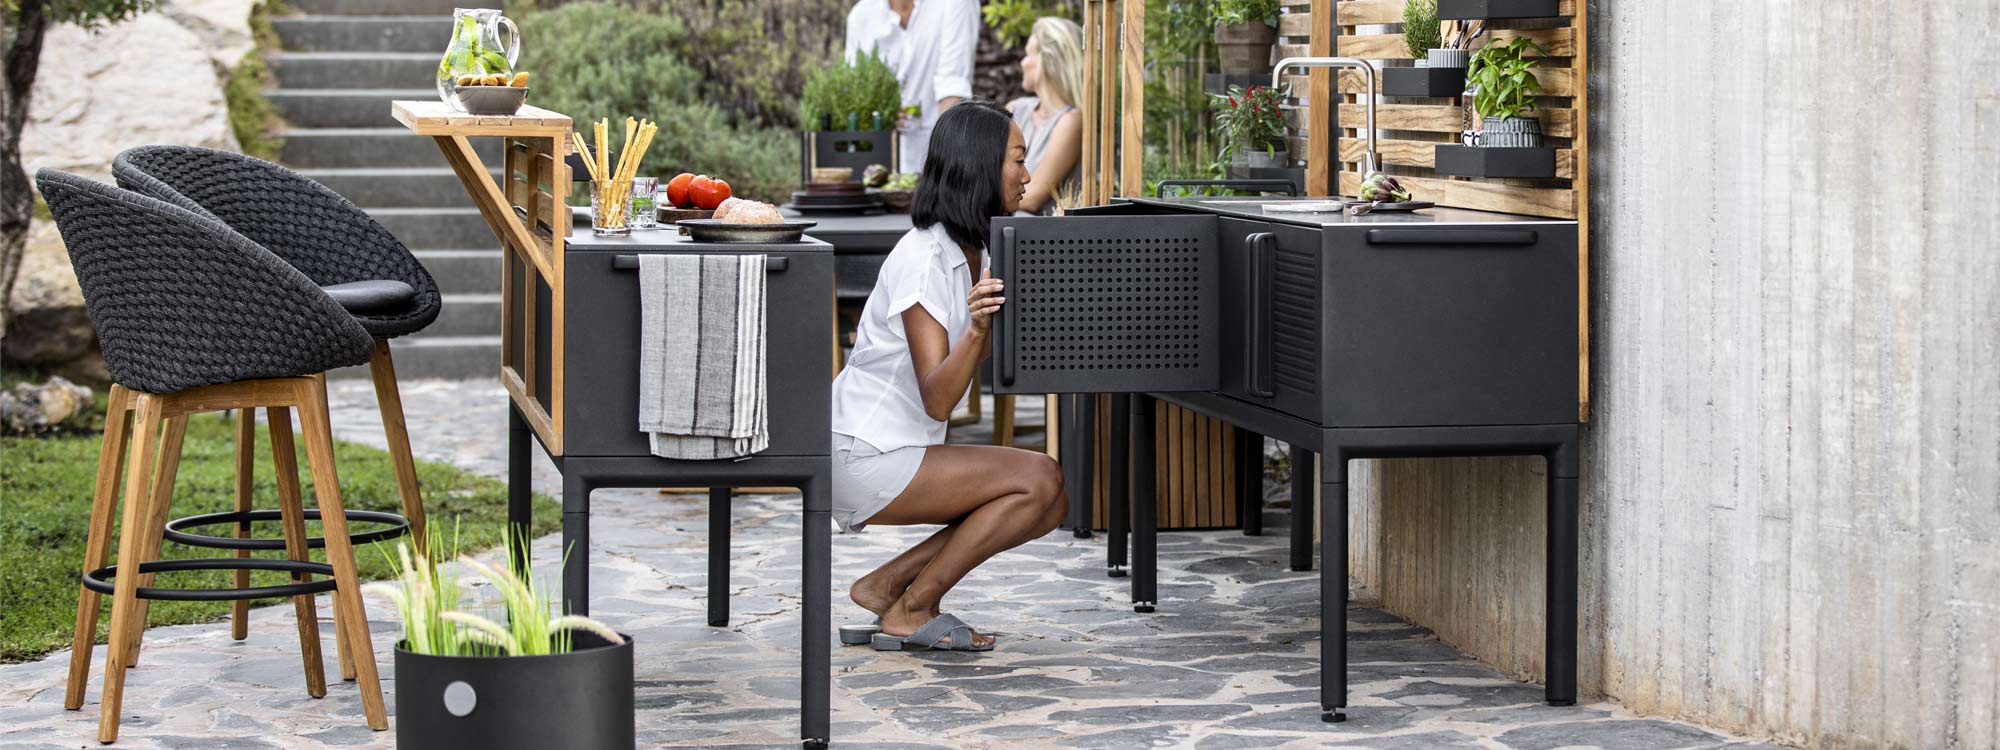 Peacock modern garden stool is a luxury outdoor bar chair in high quality exterior furniture materials by Cane-line garden furniture